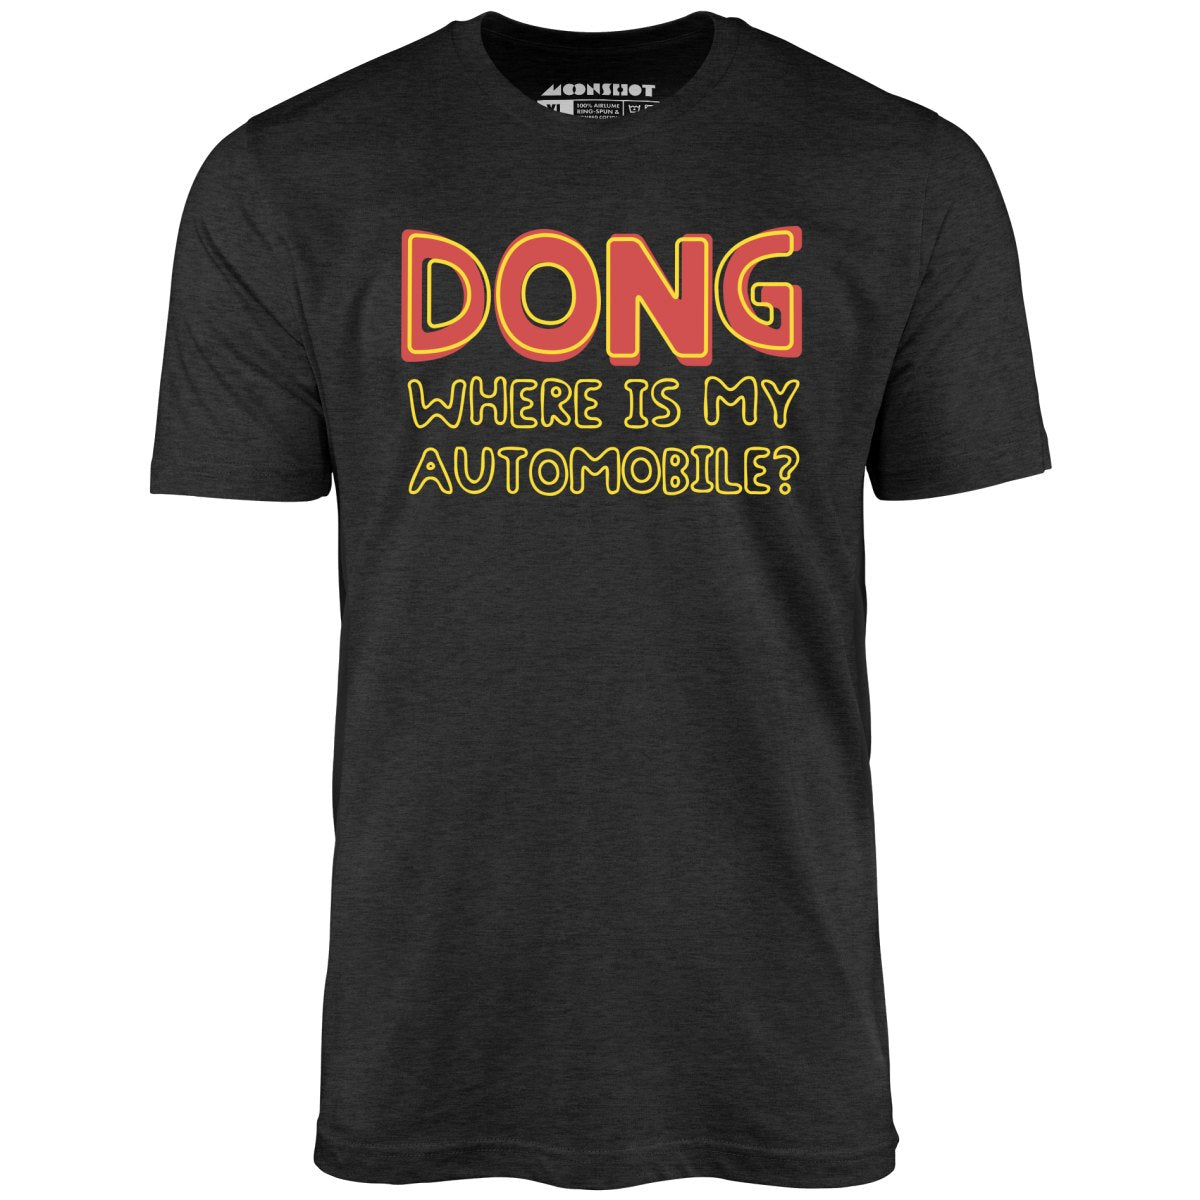 Dong Where is My Automobile? - Unisex T-Shirt